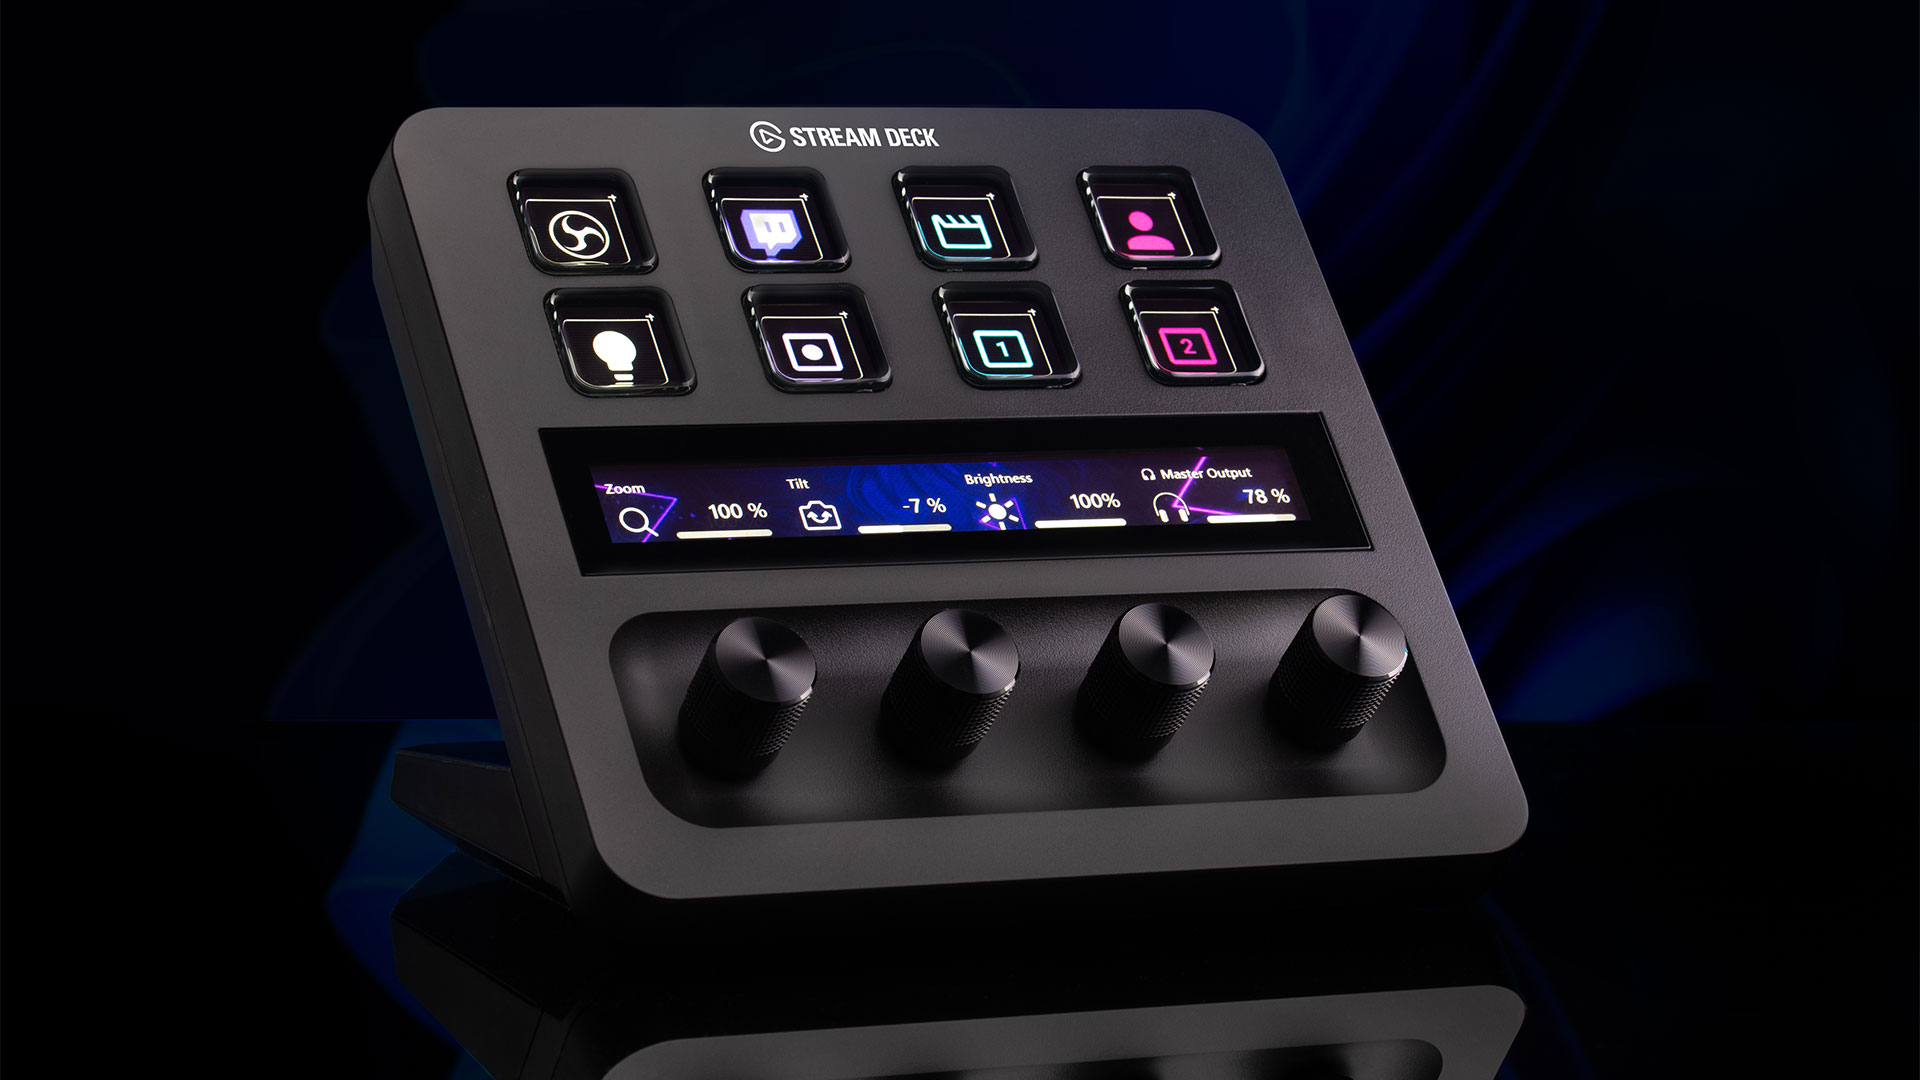 VISIO 365 OFFICE - STREAM DECK ICONS, LOUPEDECK ICONS